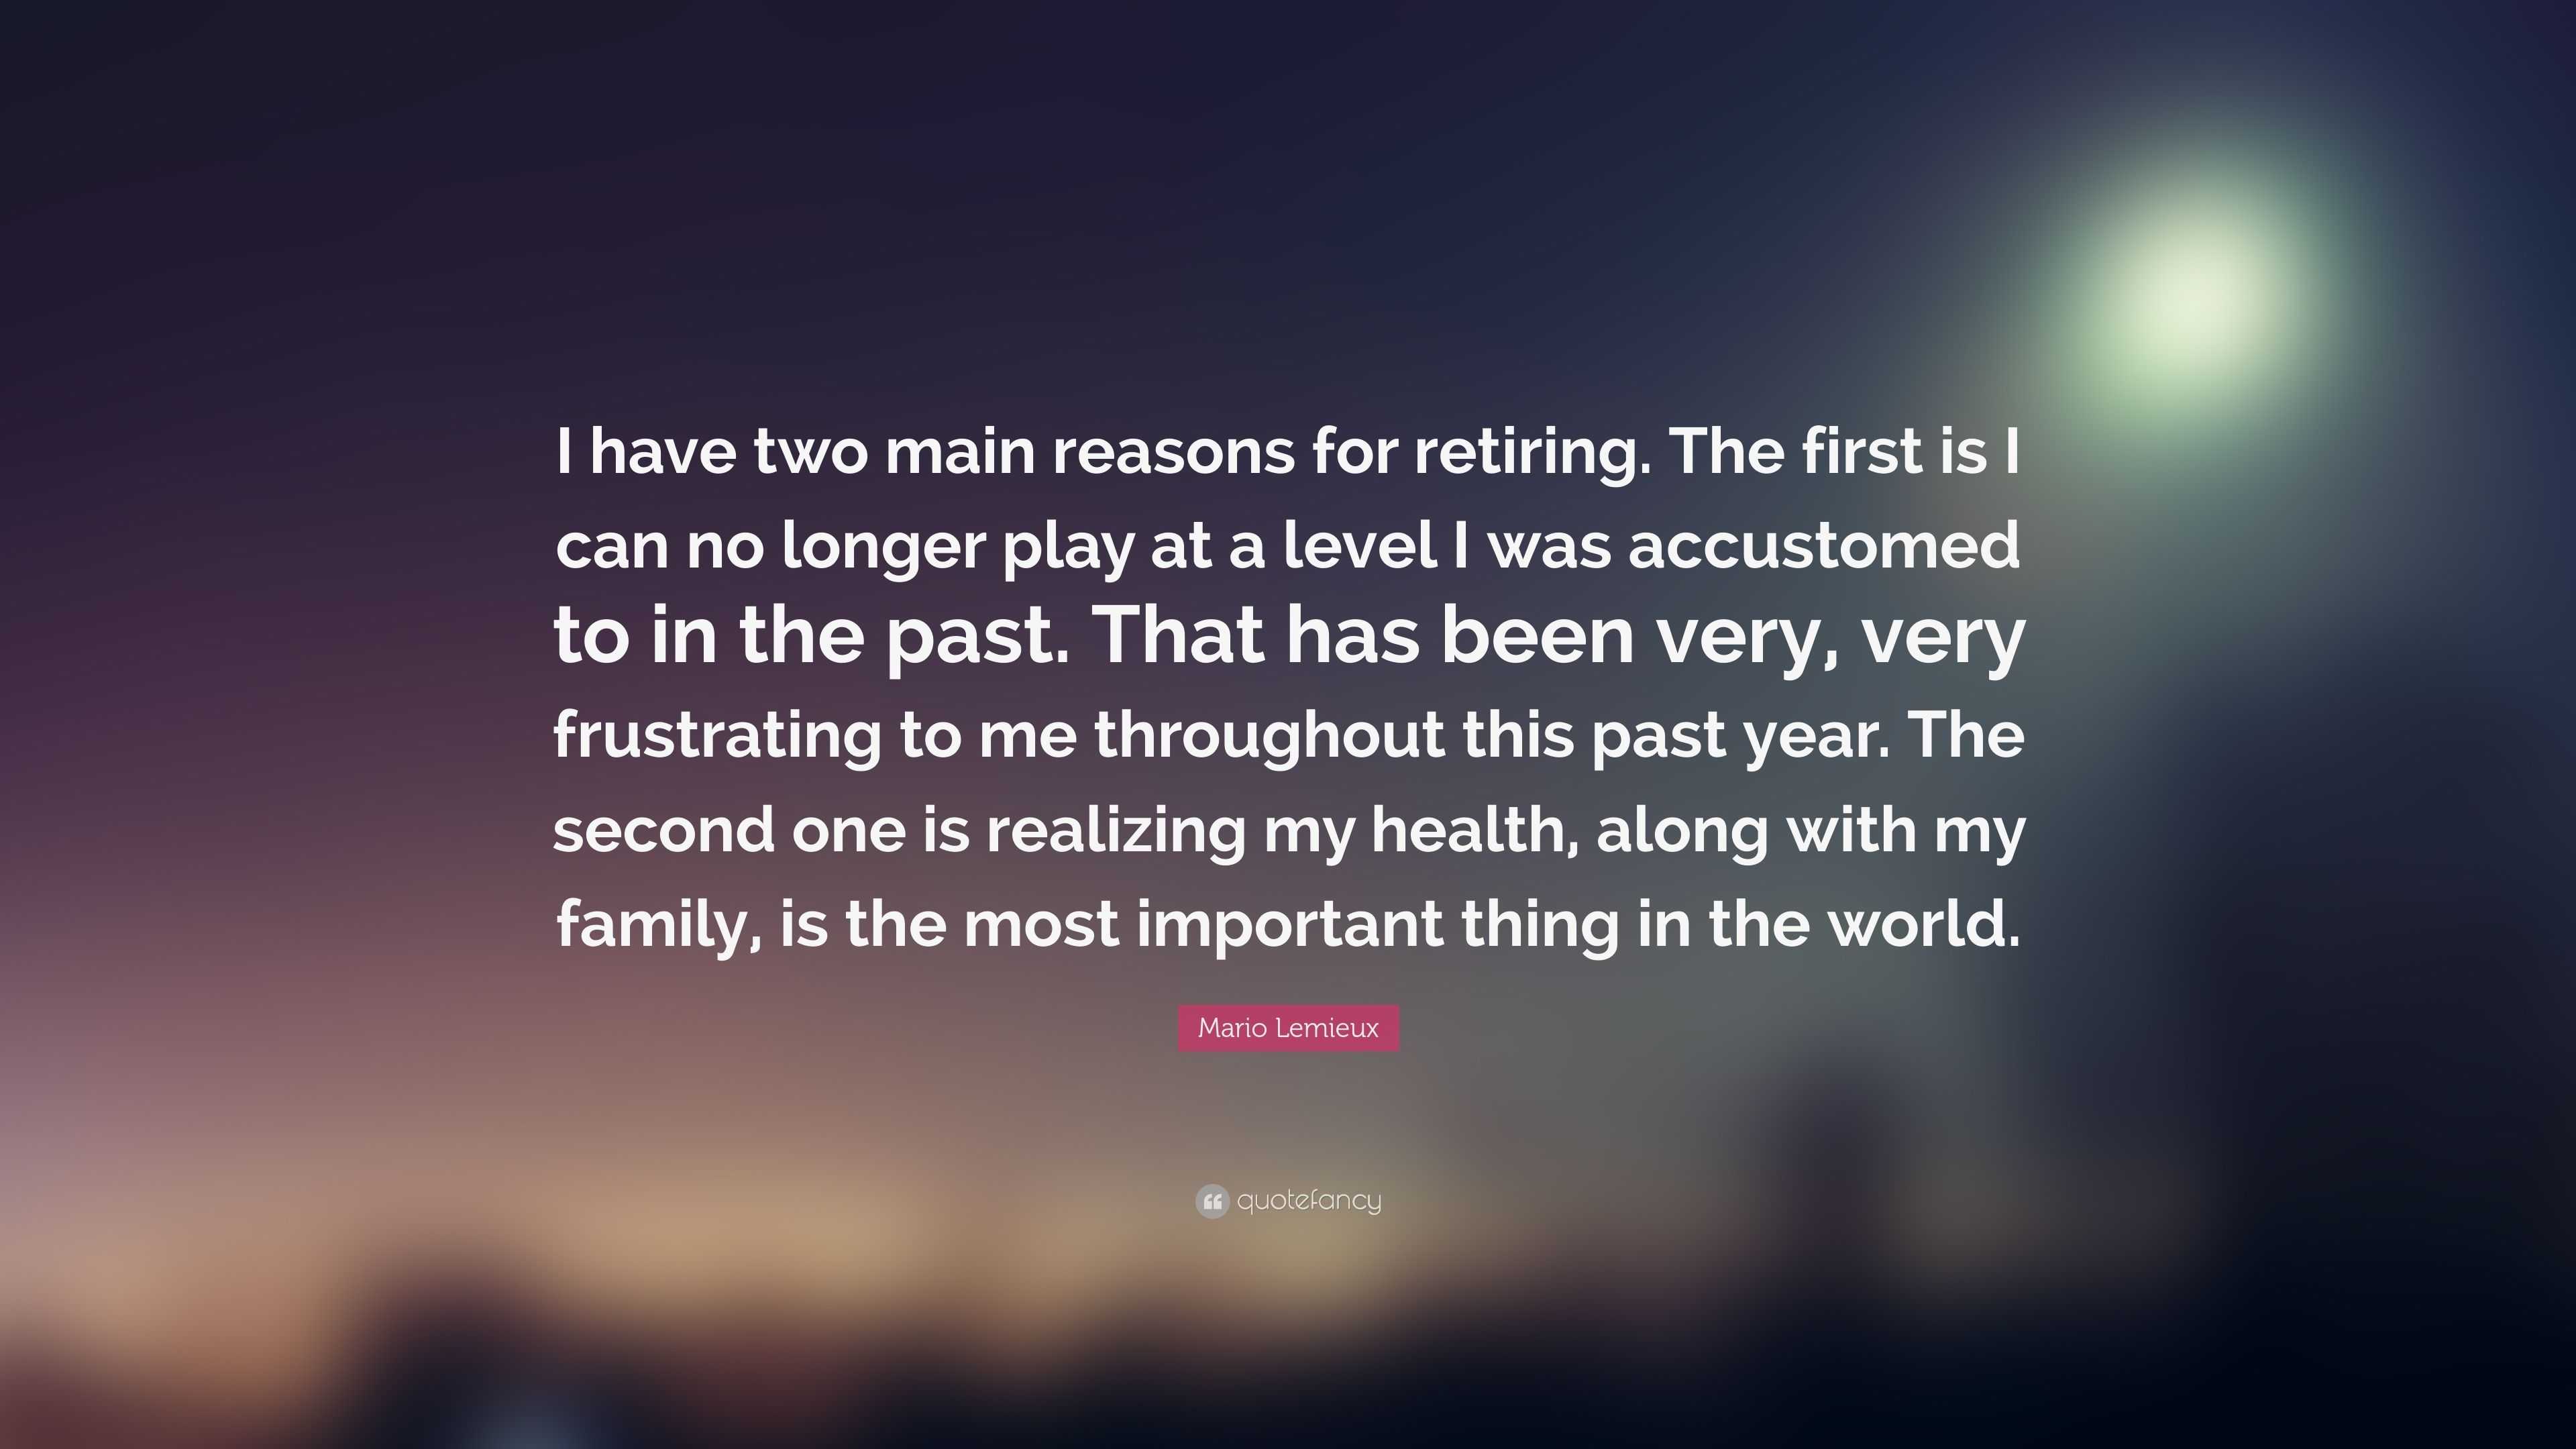 Mario Lemieux Quote: "I have two main reasons for retiring. The first is I can no longer play at ...